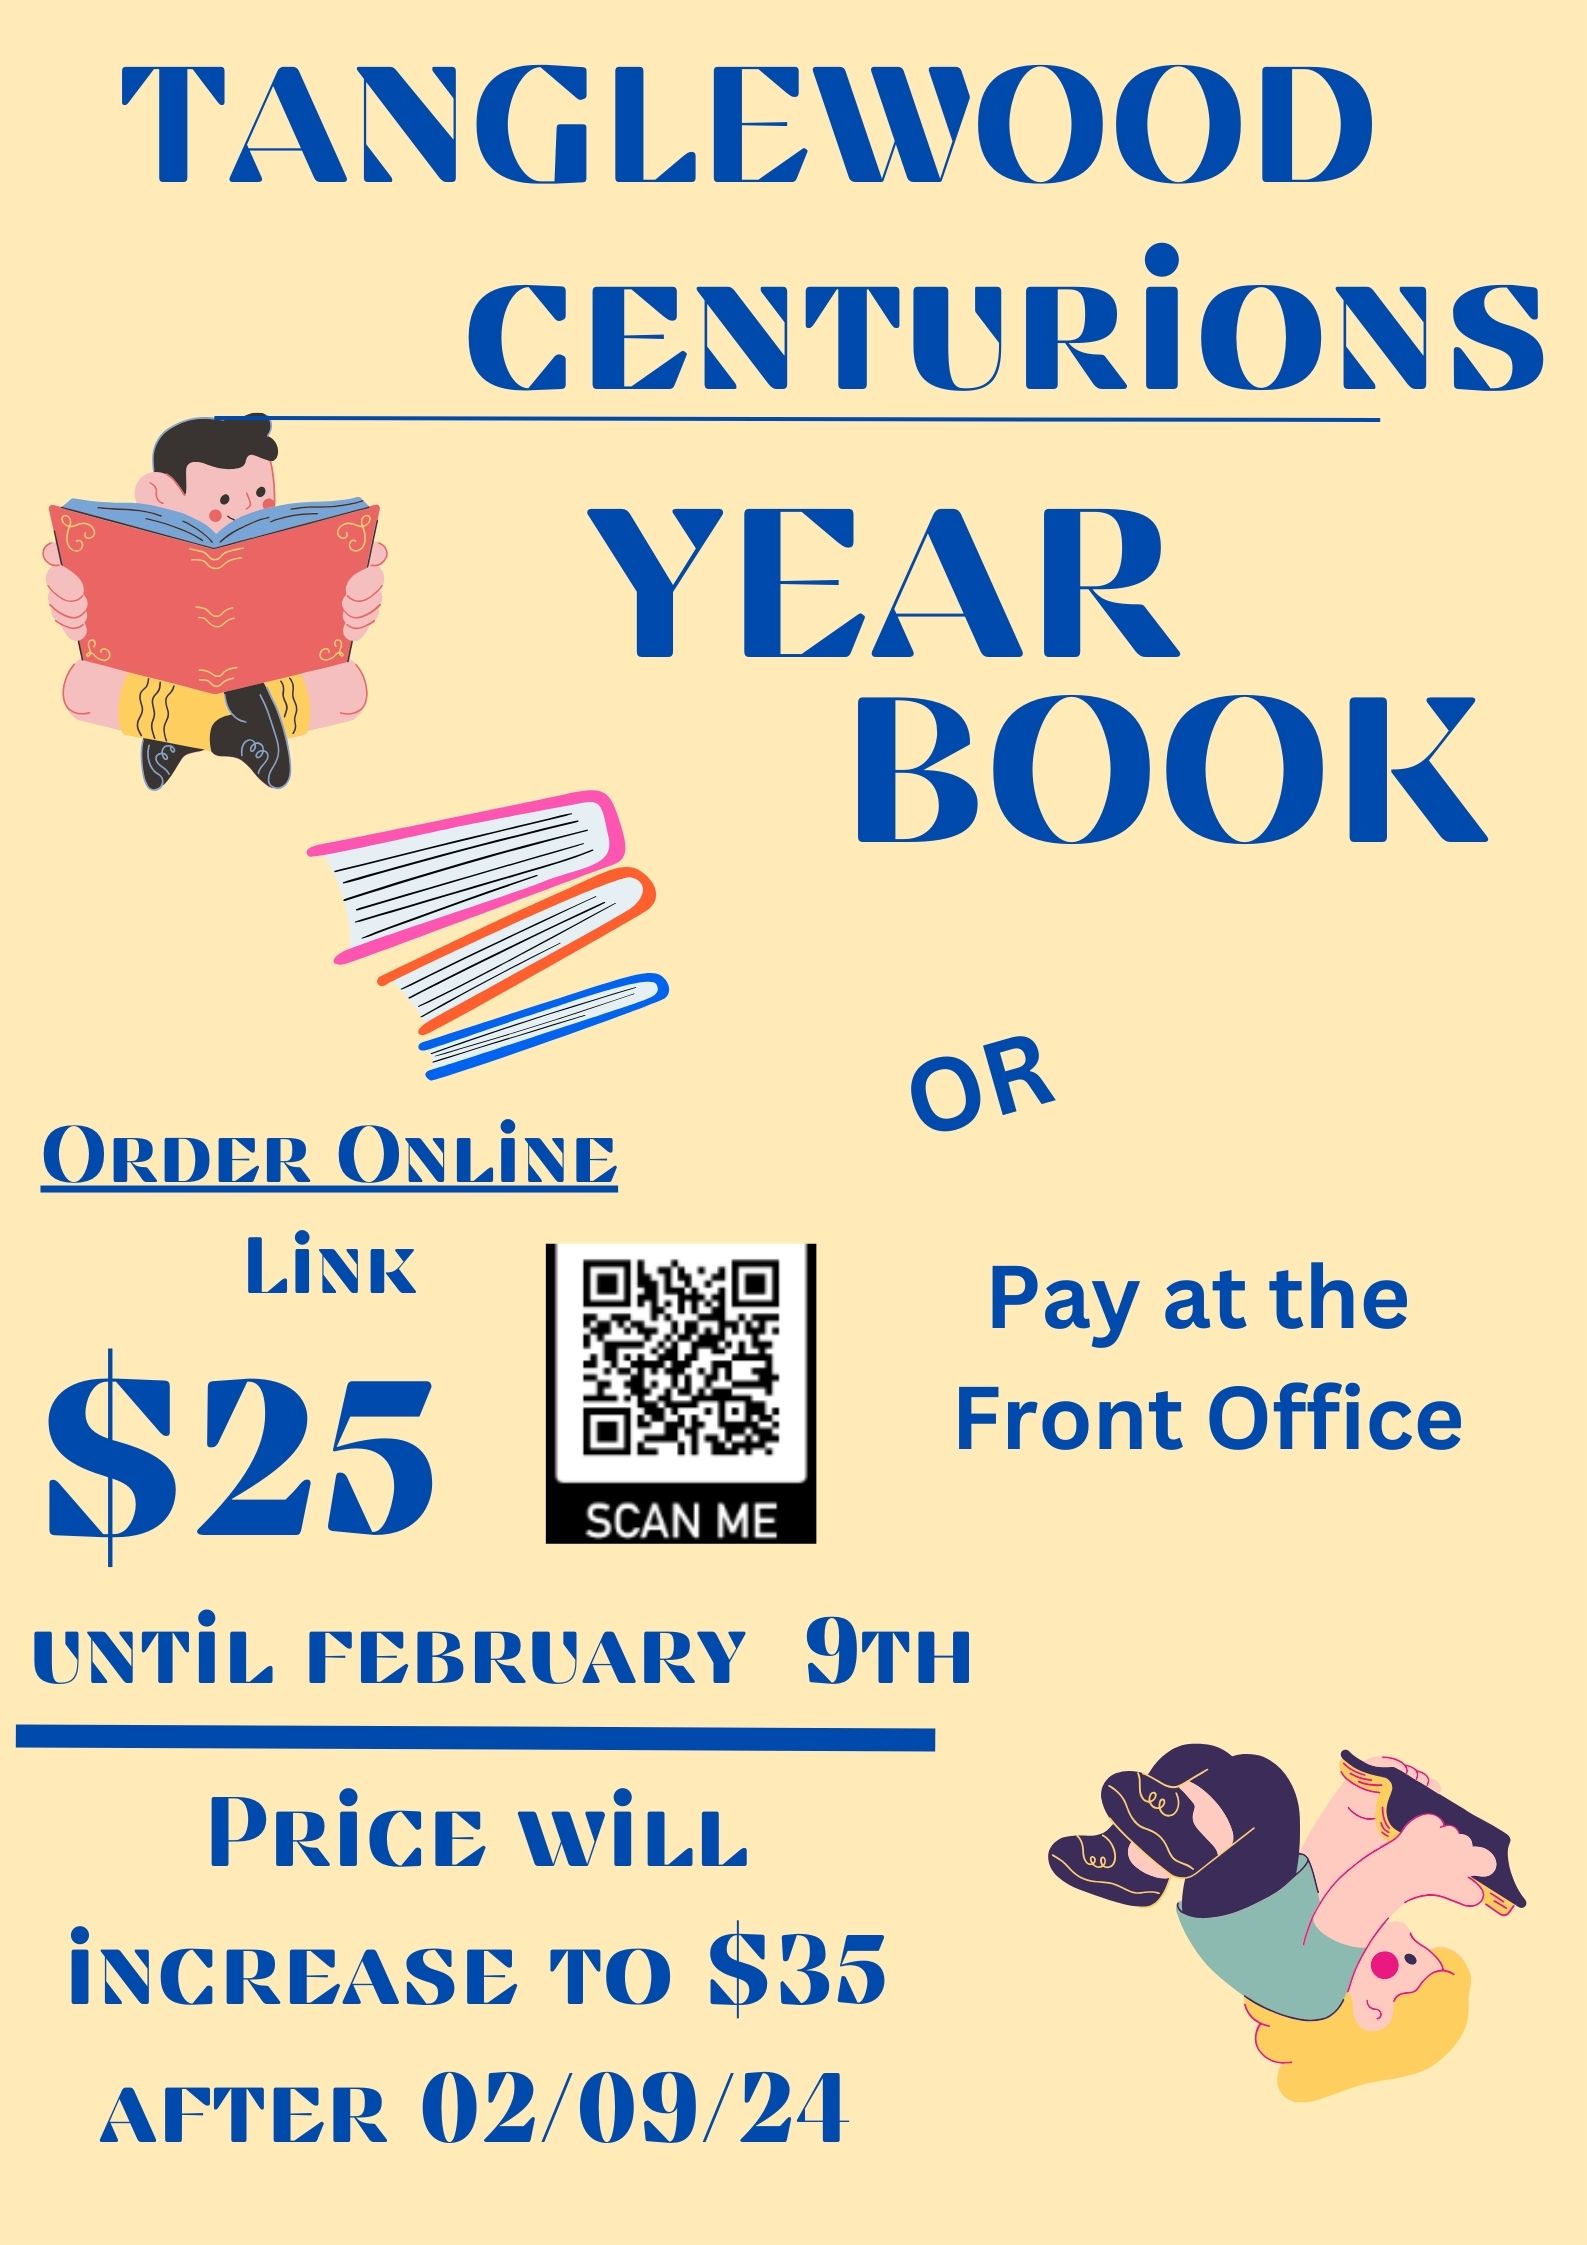 YEAR  BOOK  until february 9th  TANGLEWOOD, $25 Order, Price will increase to $35  after 02/09/24 , or Pay at the Front Office 